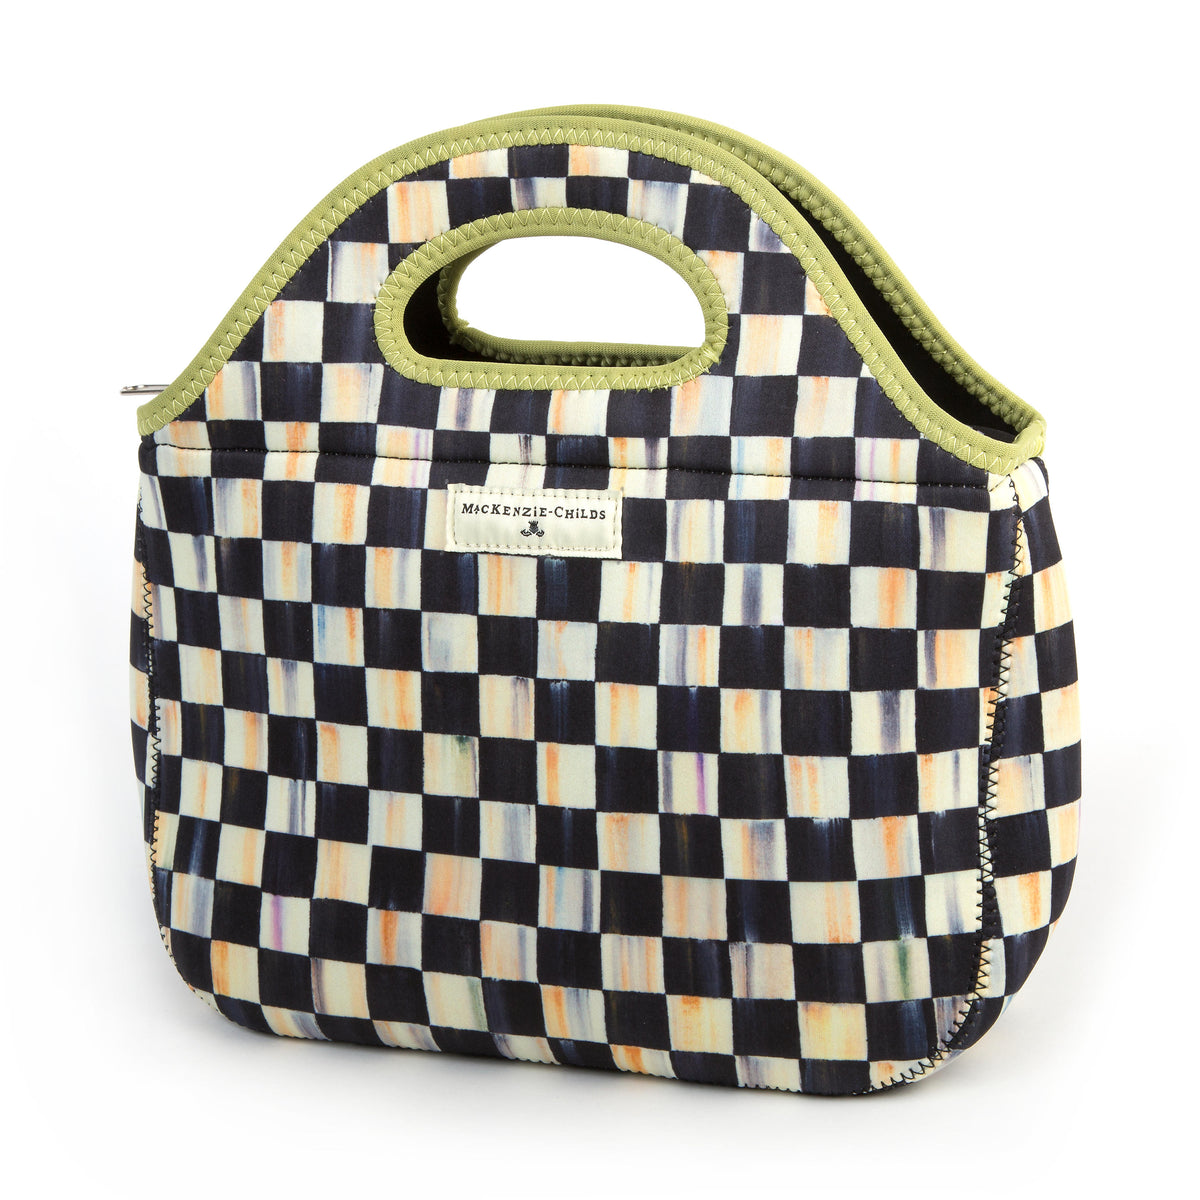 Courtly Check Lunch Tote